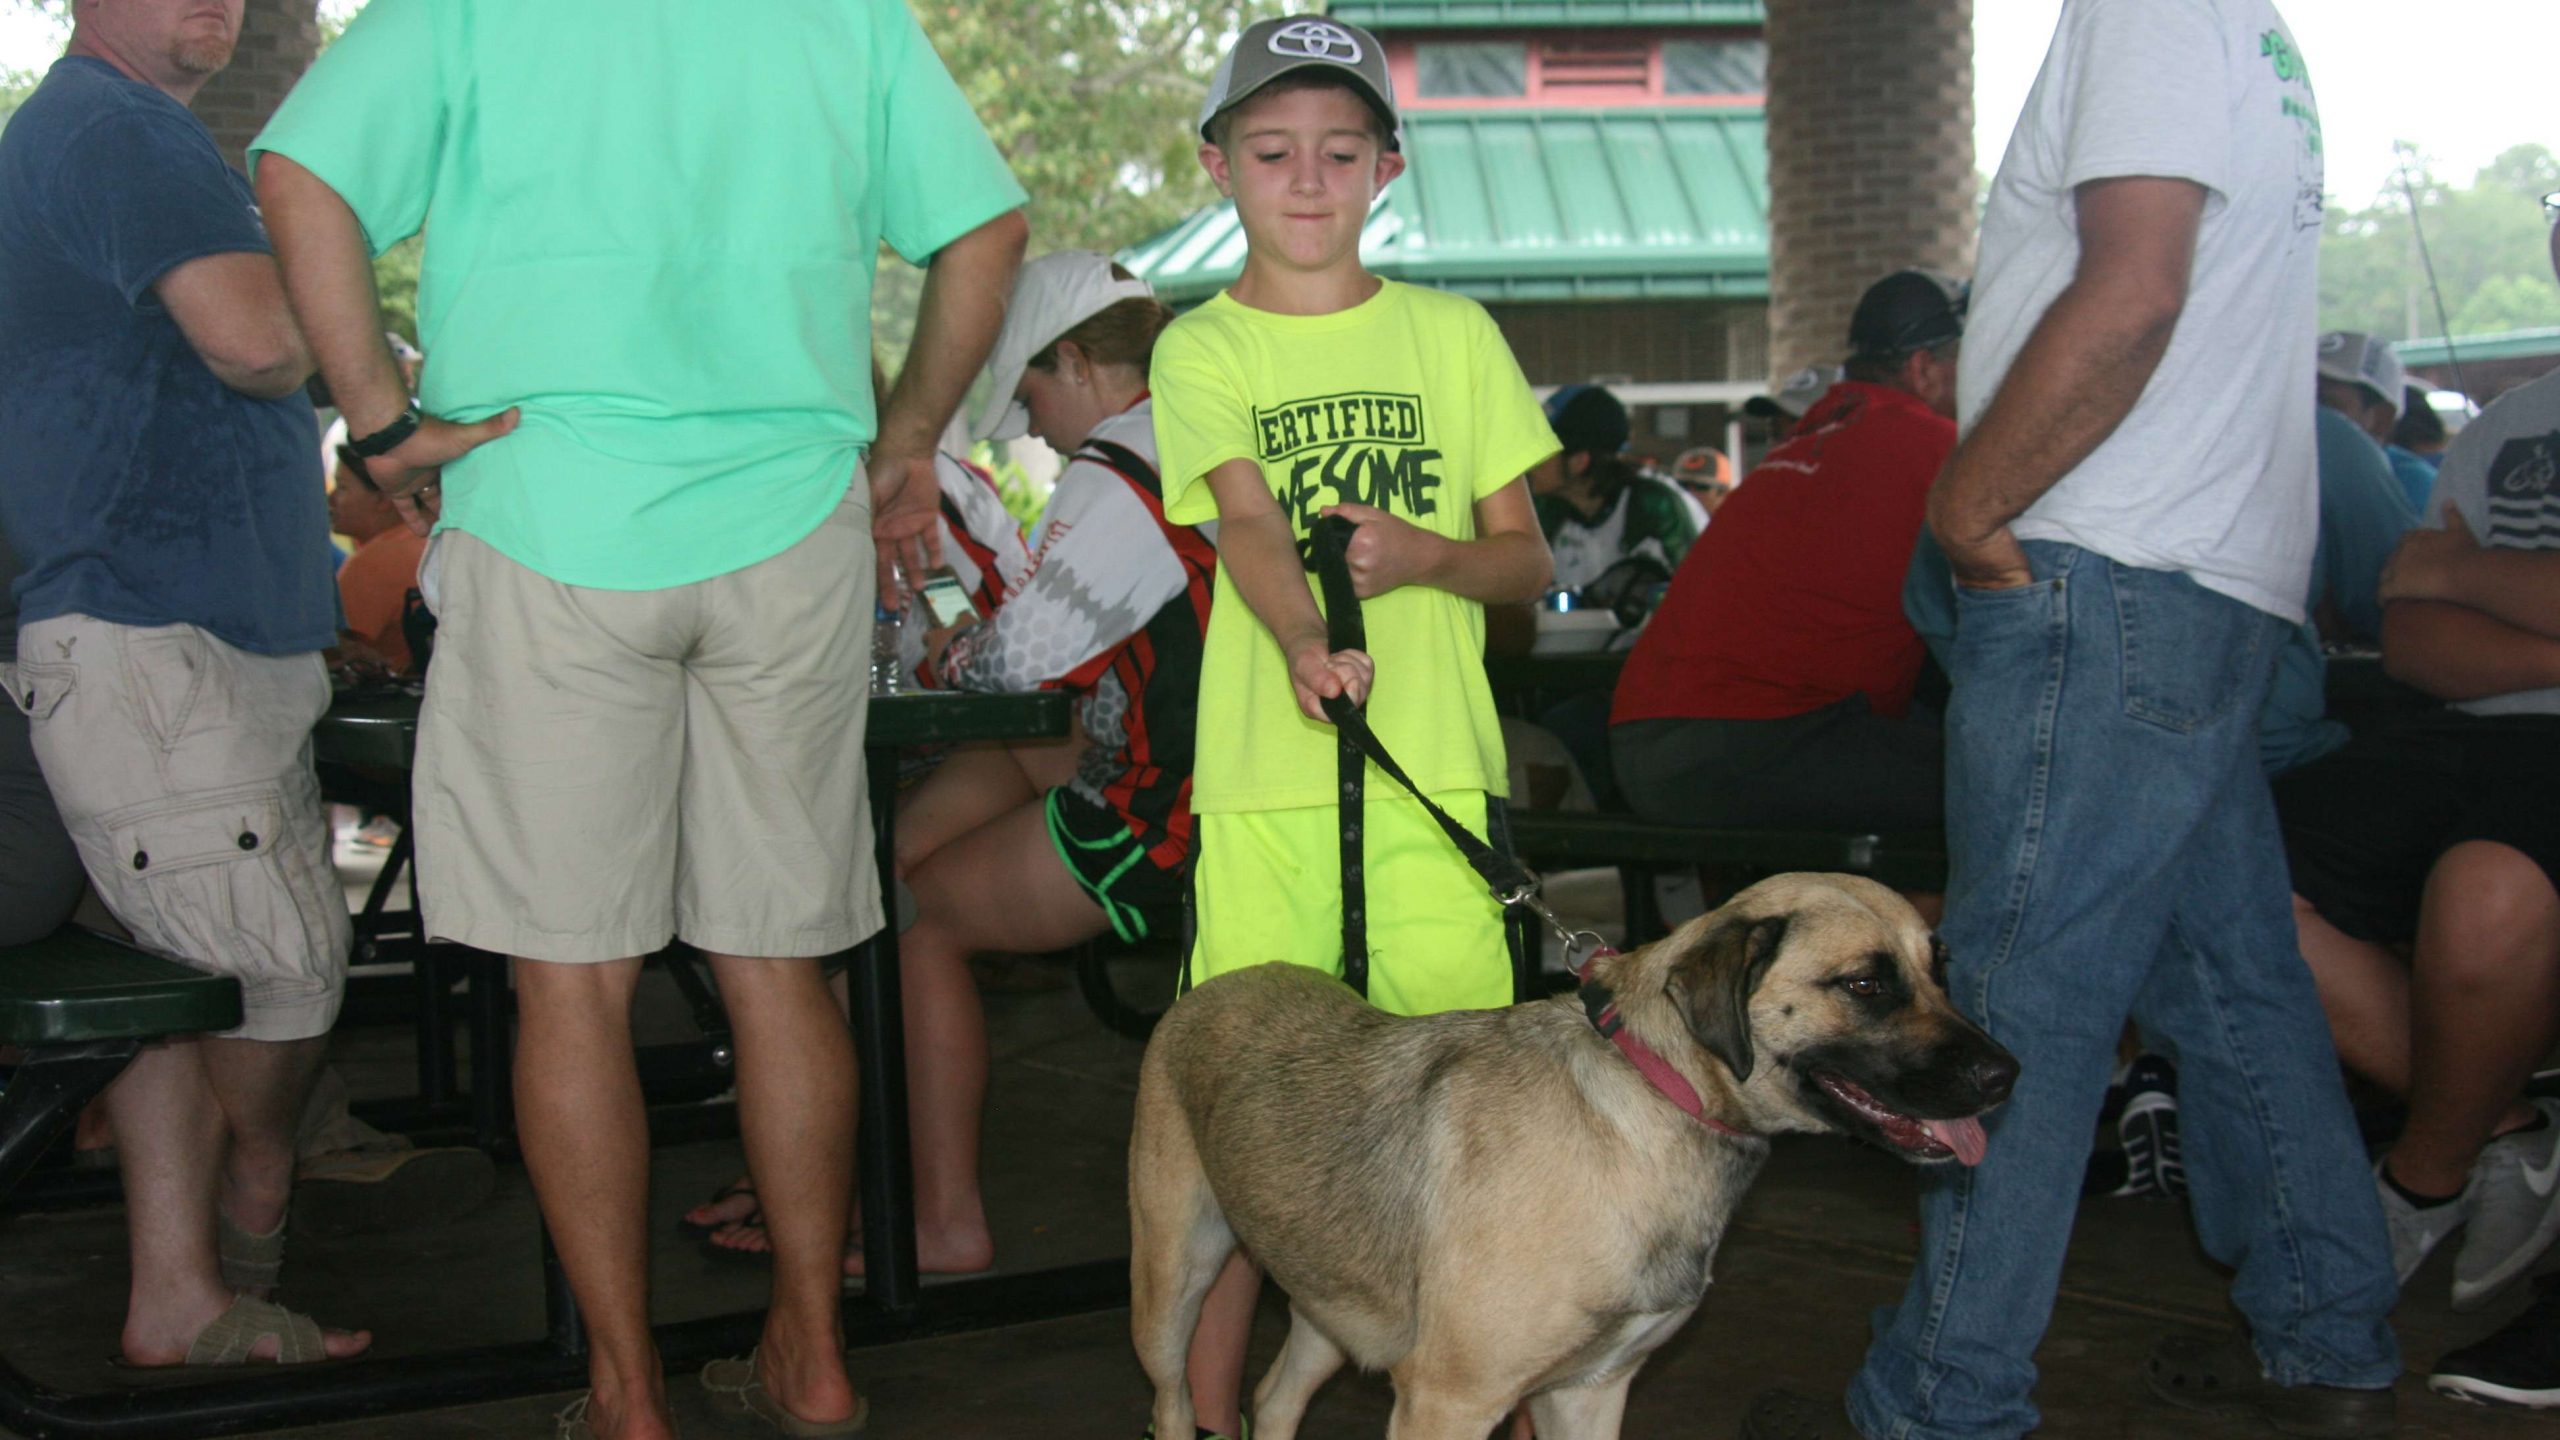 Hunter Dison, 8, had his dog Gator with him at registration and the anglers' meeting.